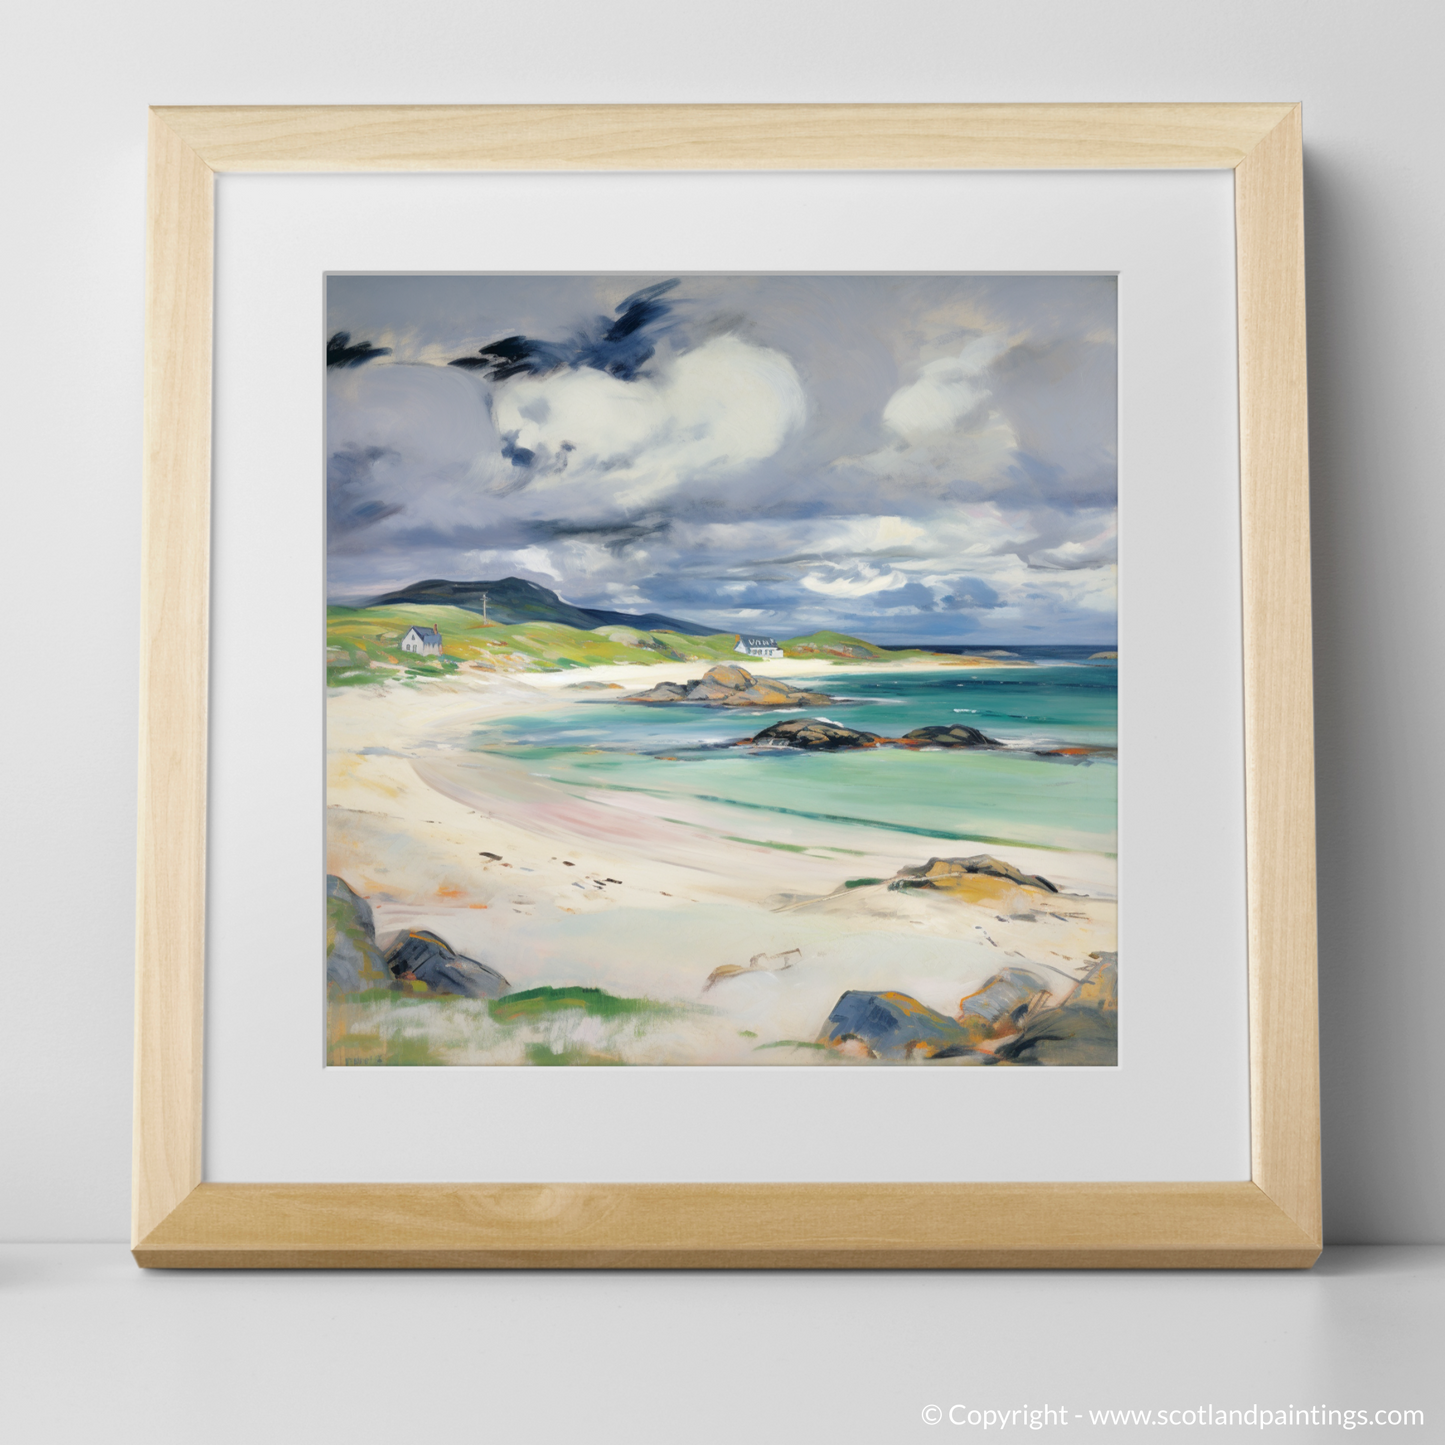 Storm Over Achmelvich Bay: An Impressionist's Dance